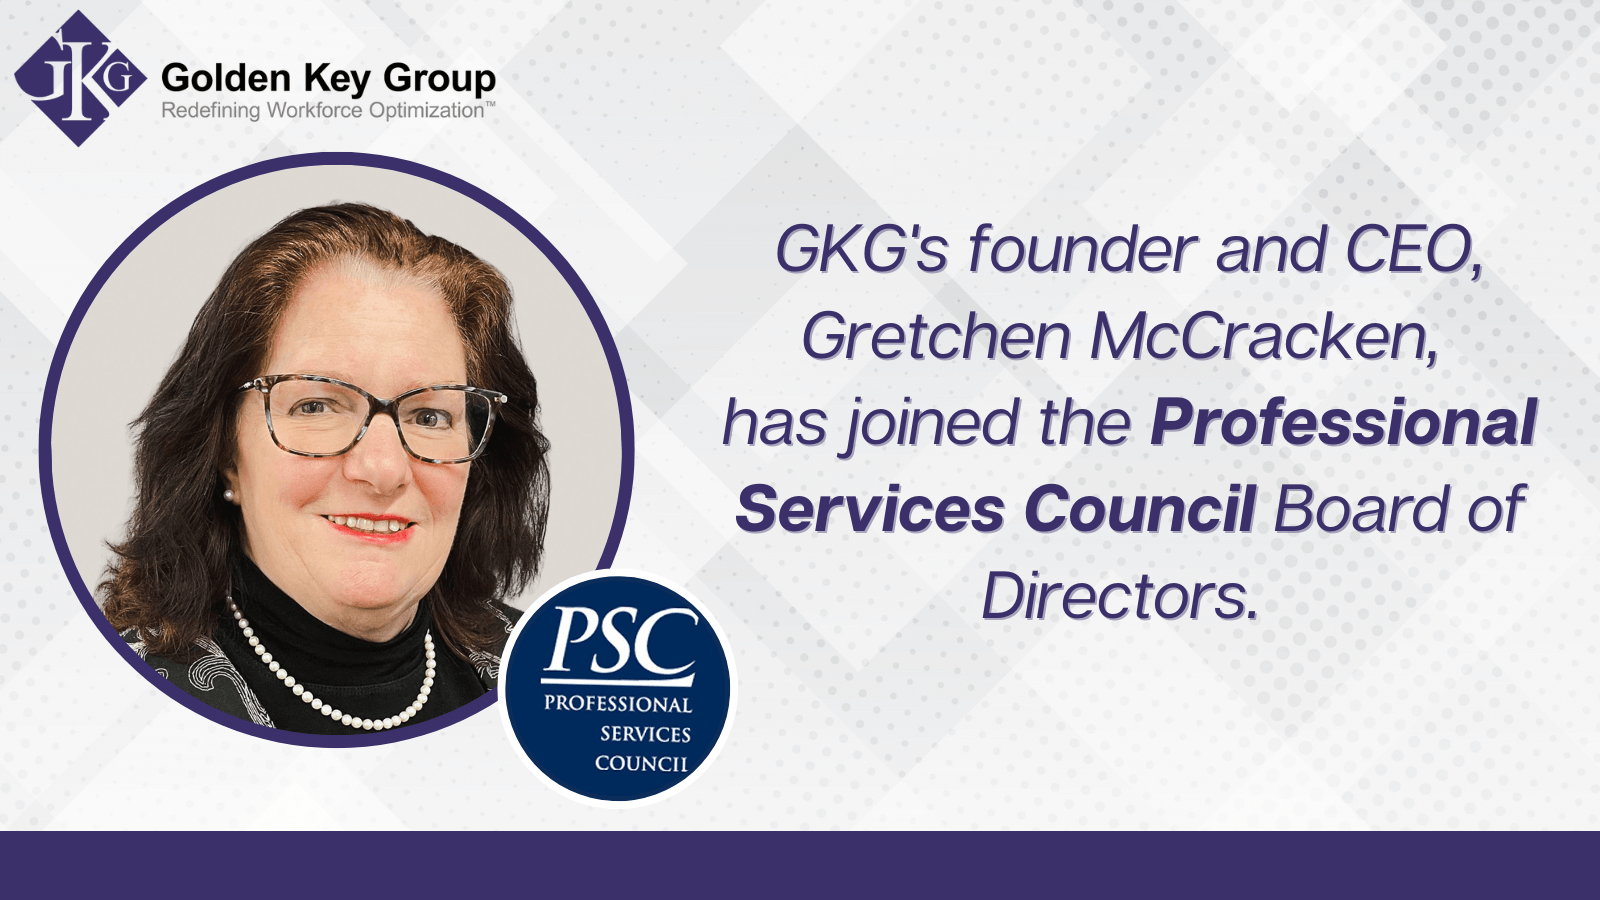 Promotional image featuring a portrait of GKG's CEO, Gretchen McCracken, announcing her addition to the Professional Services Council Board of Directors, highlighting her expertise in Human Capital Management.